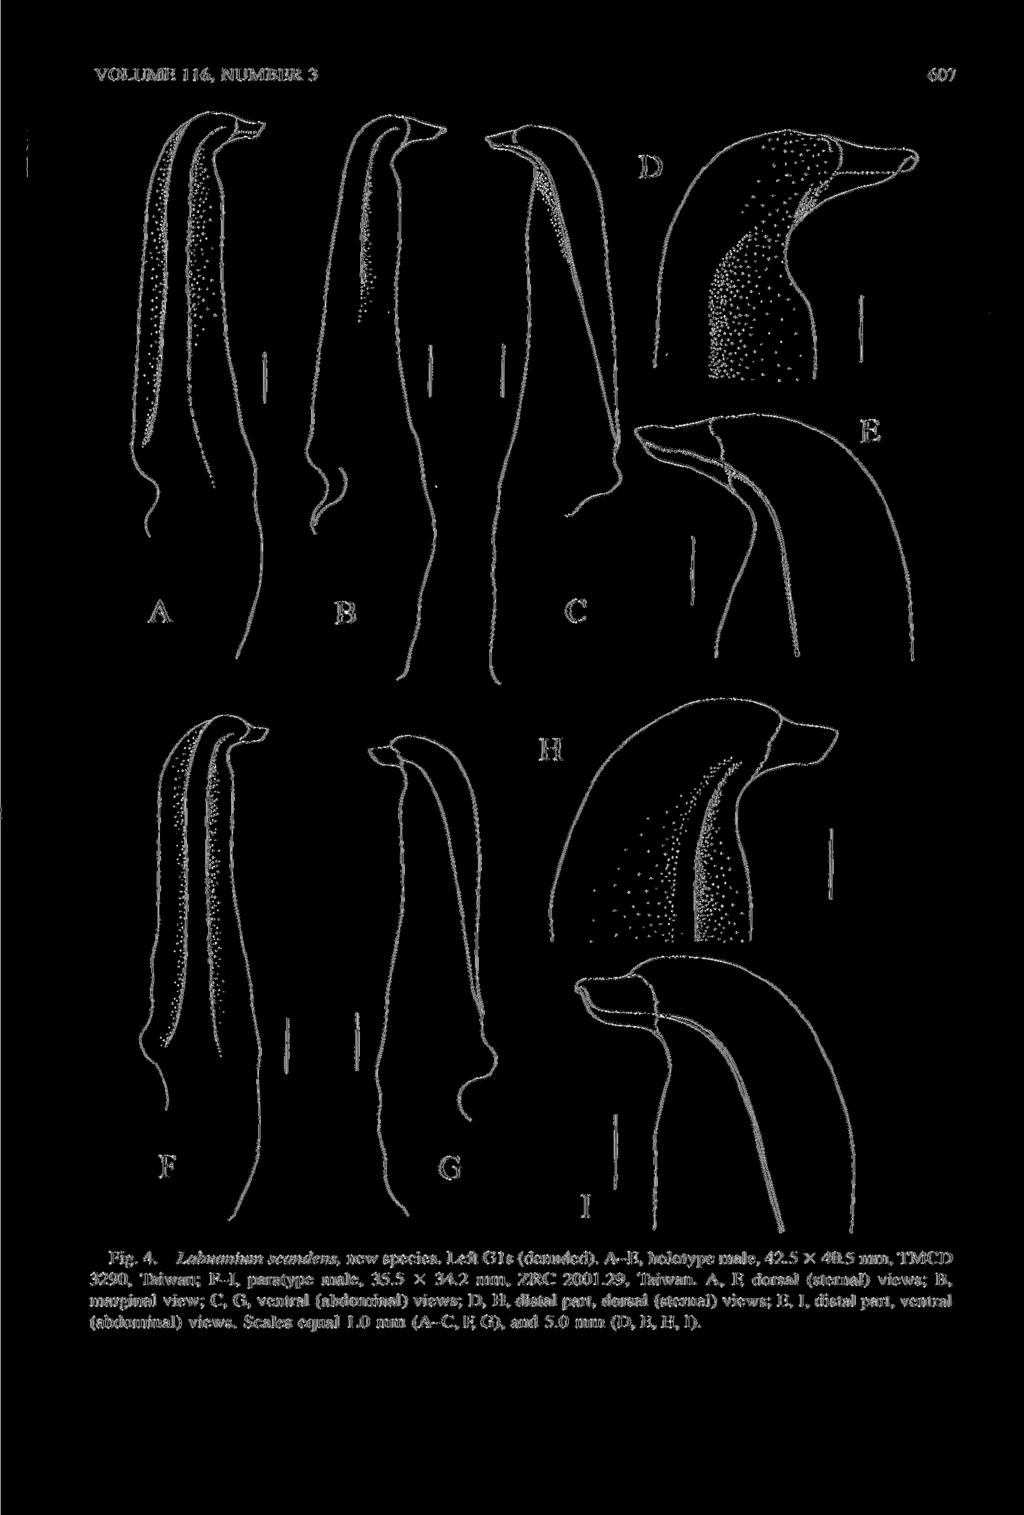 VOLUME 116, NUMBER 3 607 Fig. 4. Labuanium scandens, new species. Left Gls (denuded). A-E, holotype male, 42.5 X 40.5 mm, TMCD 3290, Taiwan; F-I, paratype male, 35.5 X 34.2 mm, ZRC 2001.29, Taiwan.